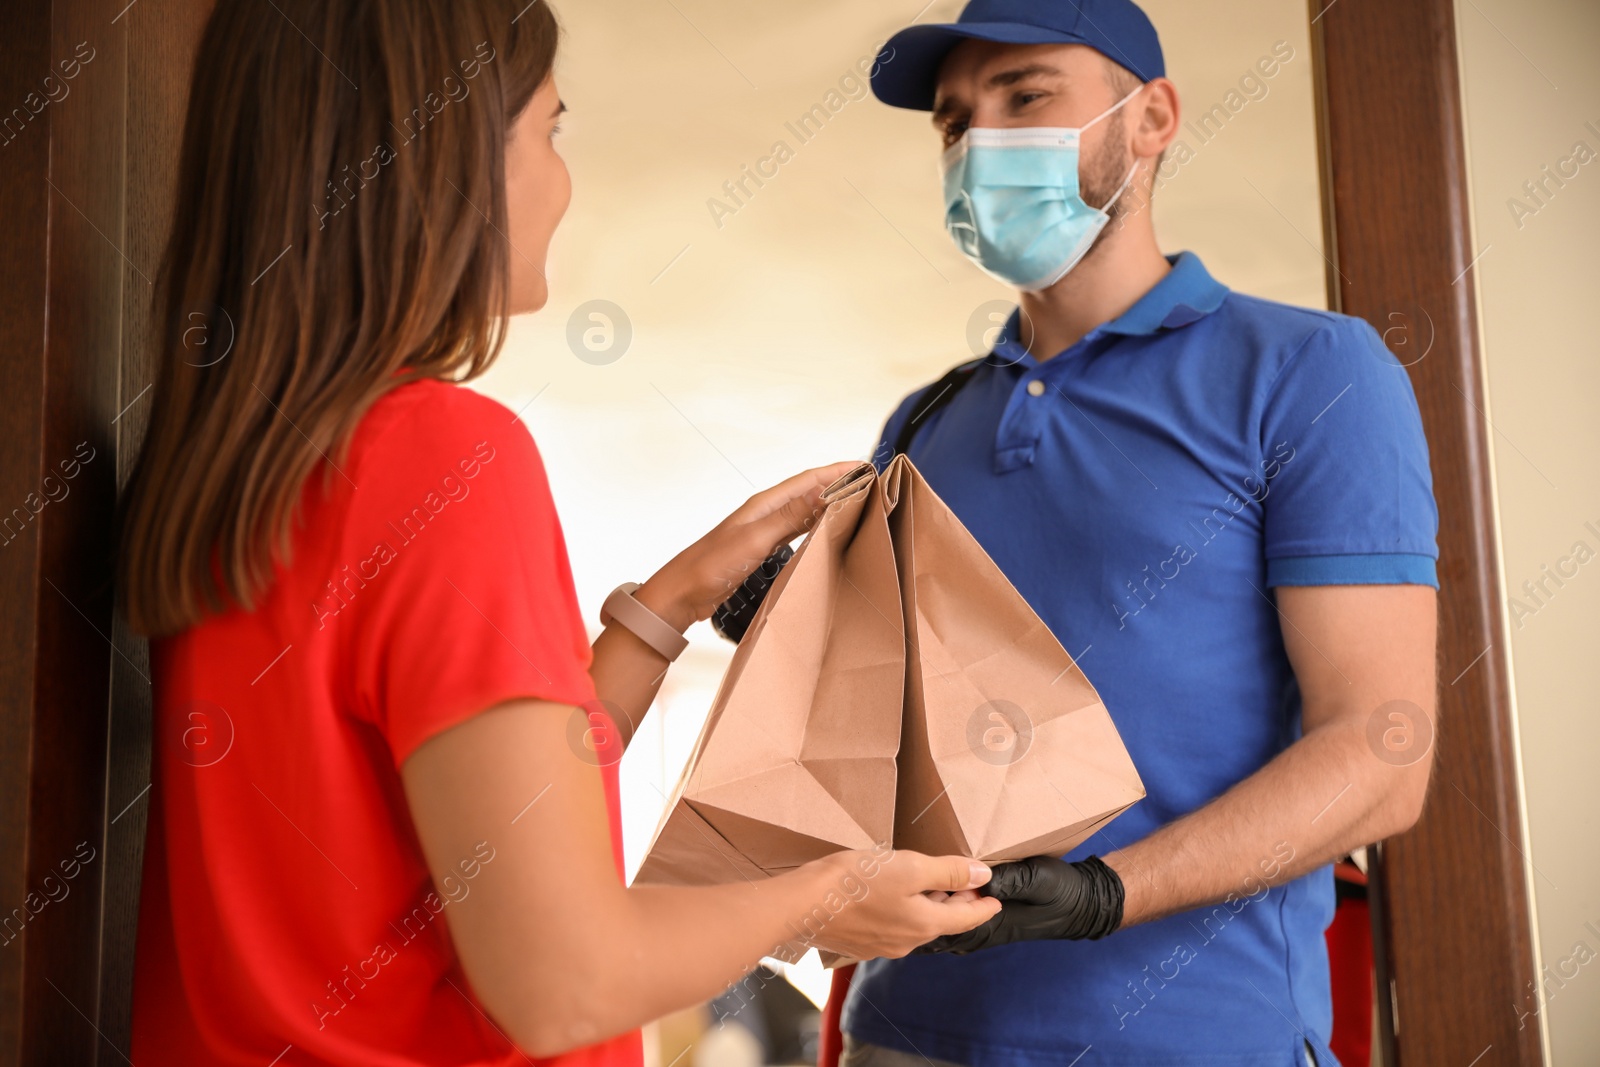 Photo of Courier in protective mask and gloves giving order to woman at entrance. Restaurant delivery service during coronavirus quarantine